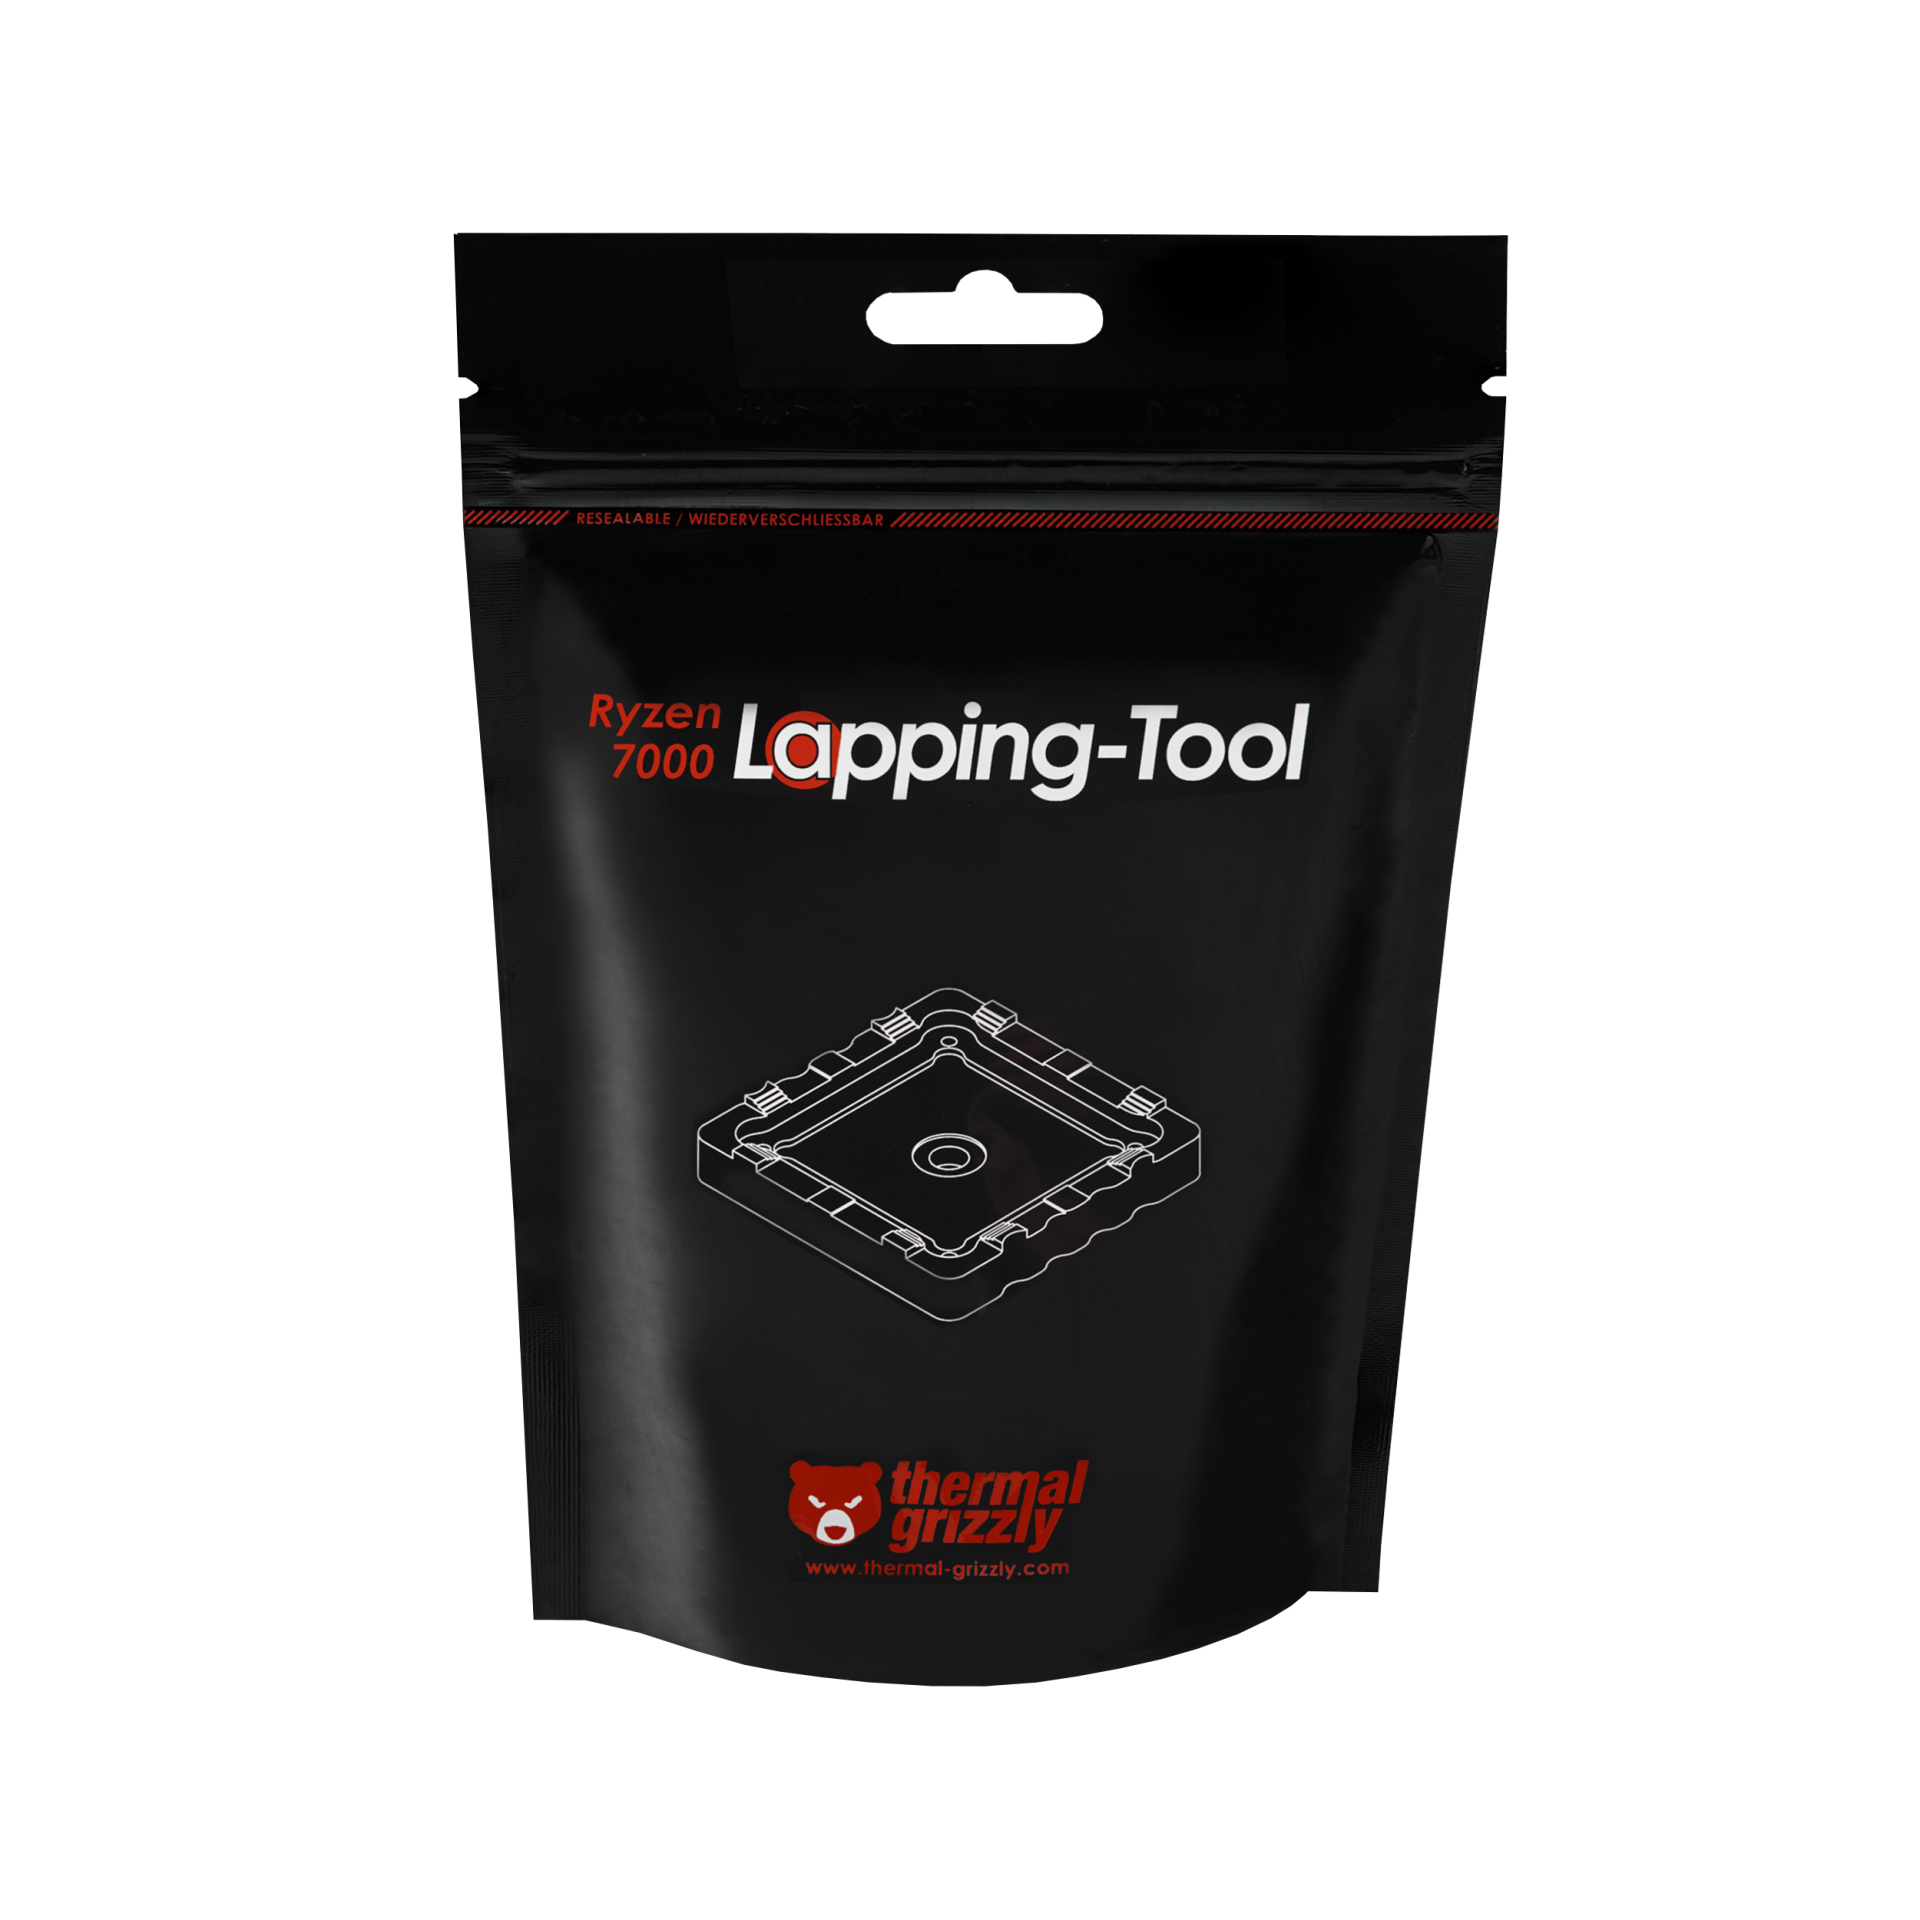 Thermal Grizzly - Ferramenta de Lapping Thermal Grizzly para Ryzen 7000